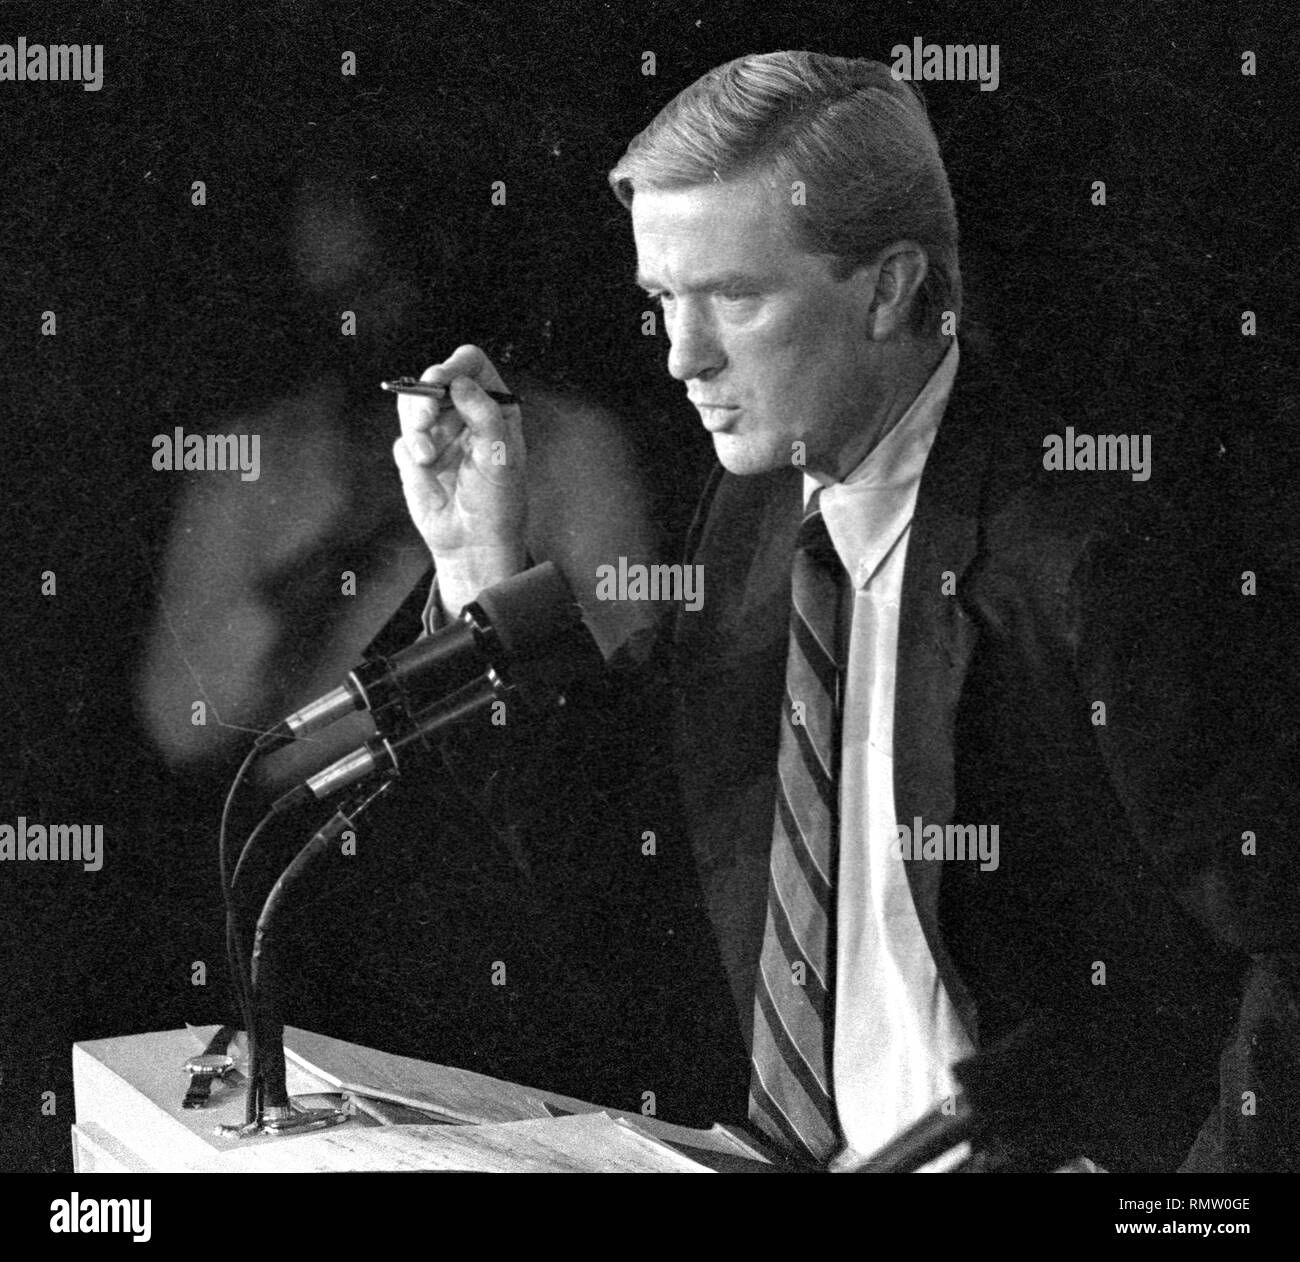 Former Massachusetts Governor Bill Weld announced he will run against President Donald Trump for the Republican Presidential nomination in 2020. Weld in this image was photographed during a Massachusetts gubernatorial debate in Boston Ma USA photo by Bill Belknap 1995 Stock Photo